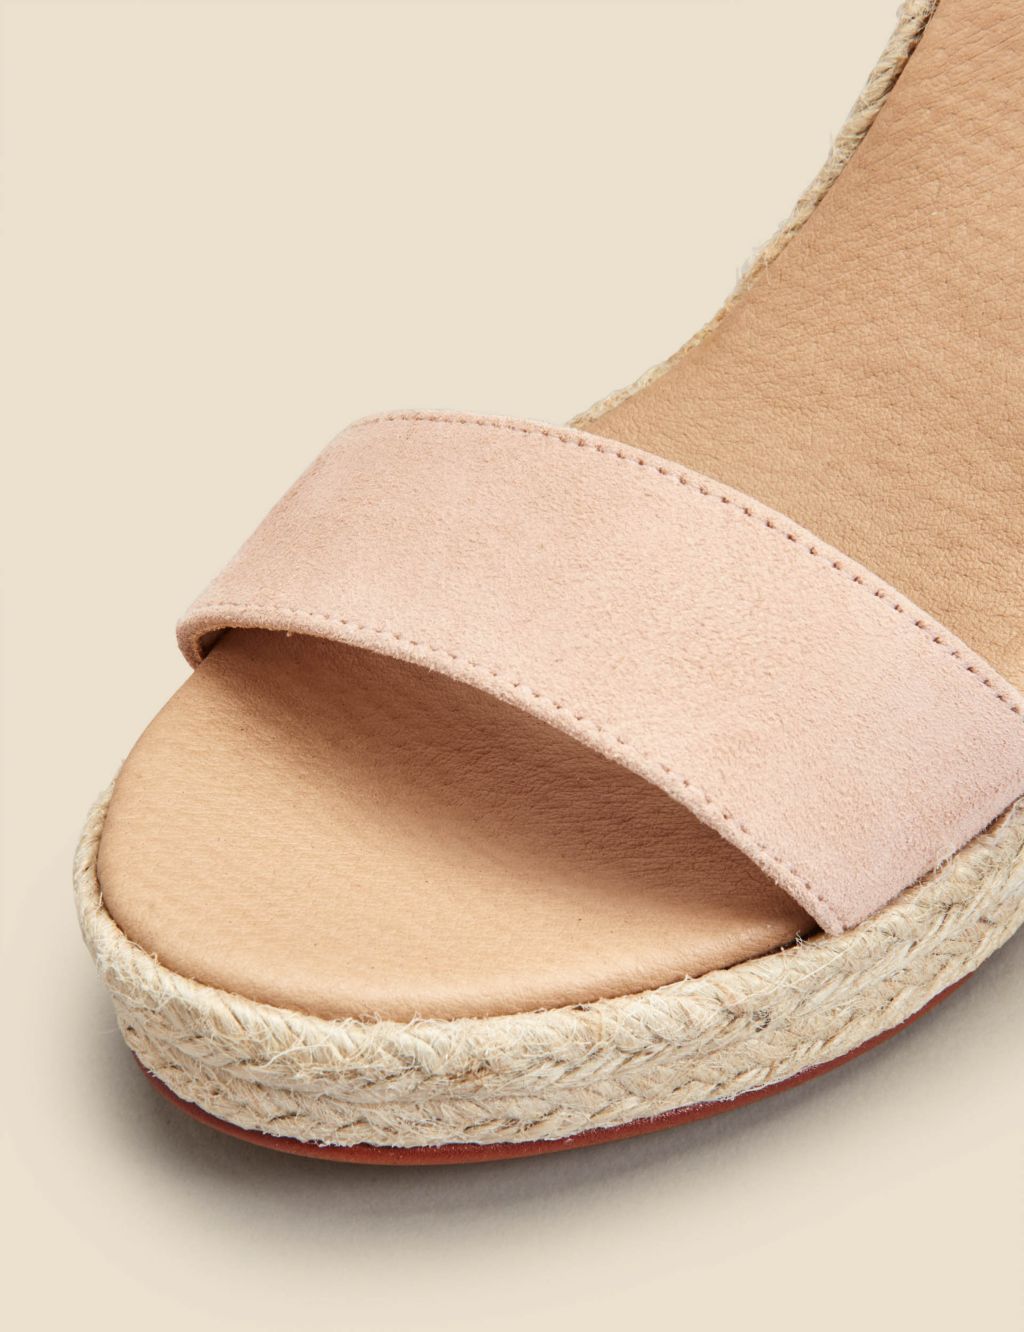 Suede Buckle Ankle Strap Wedge Espadrilles image 3